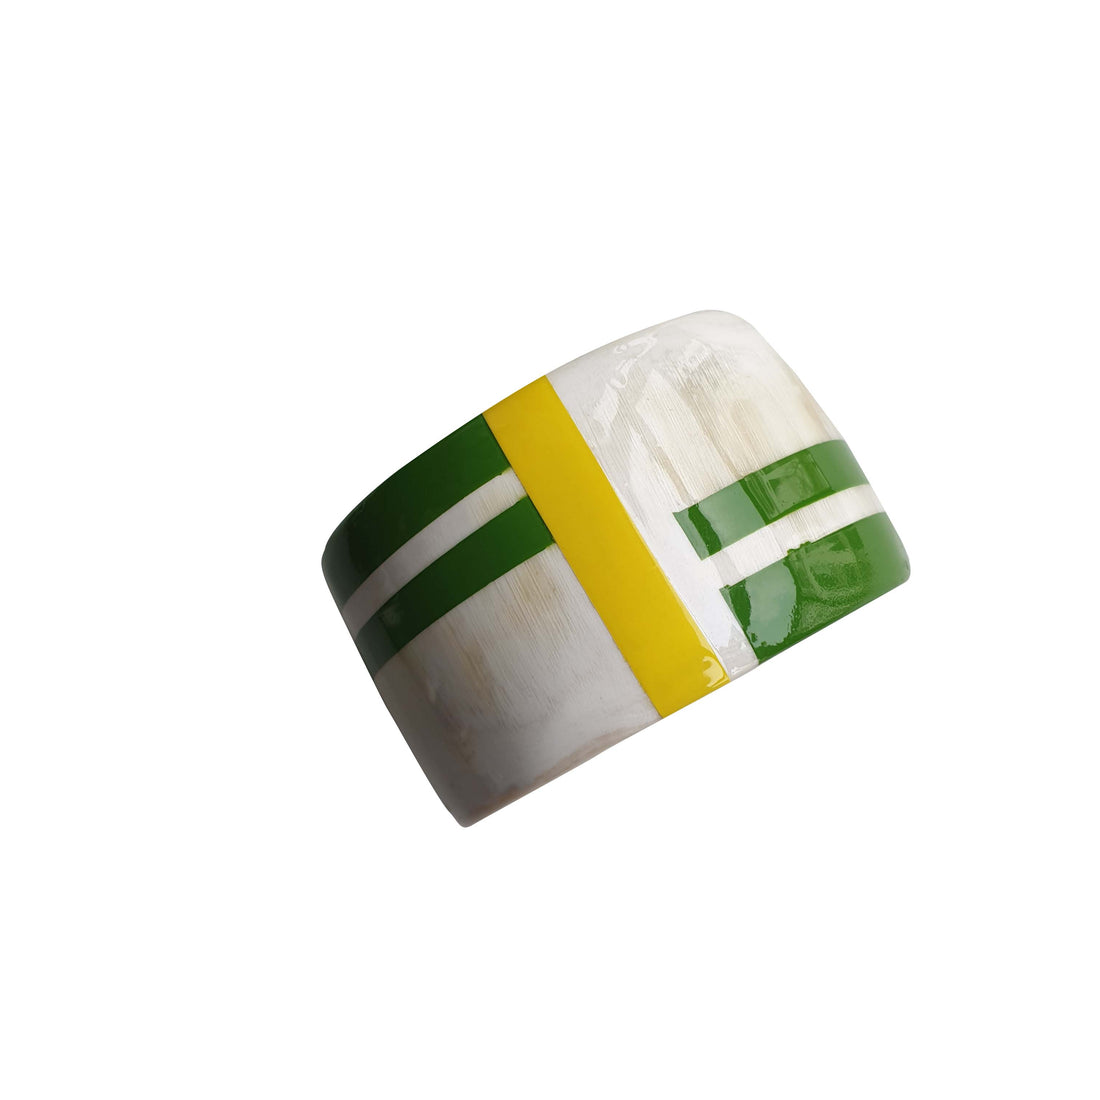 Bright horn jewelry cuff bracelet features white, green, and yellow